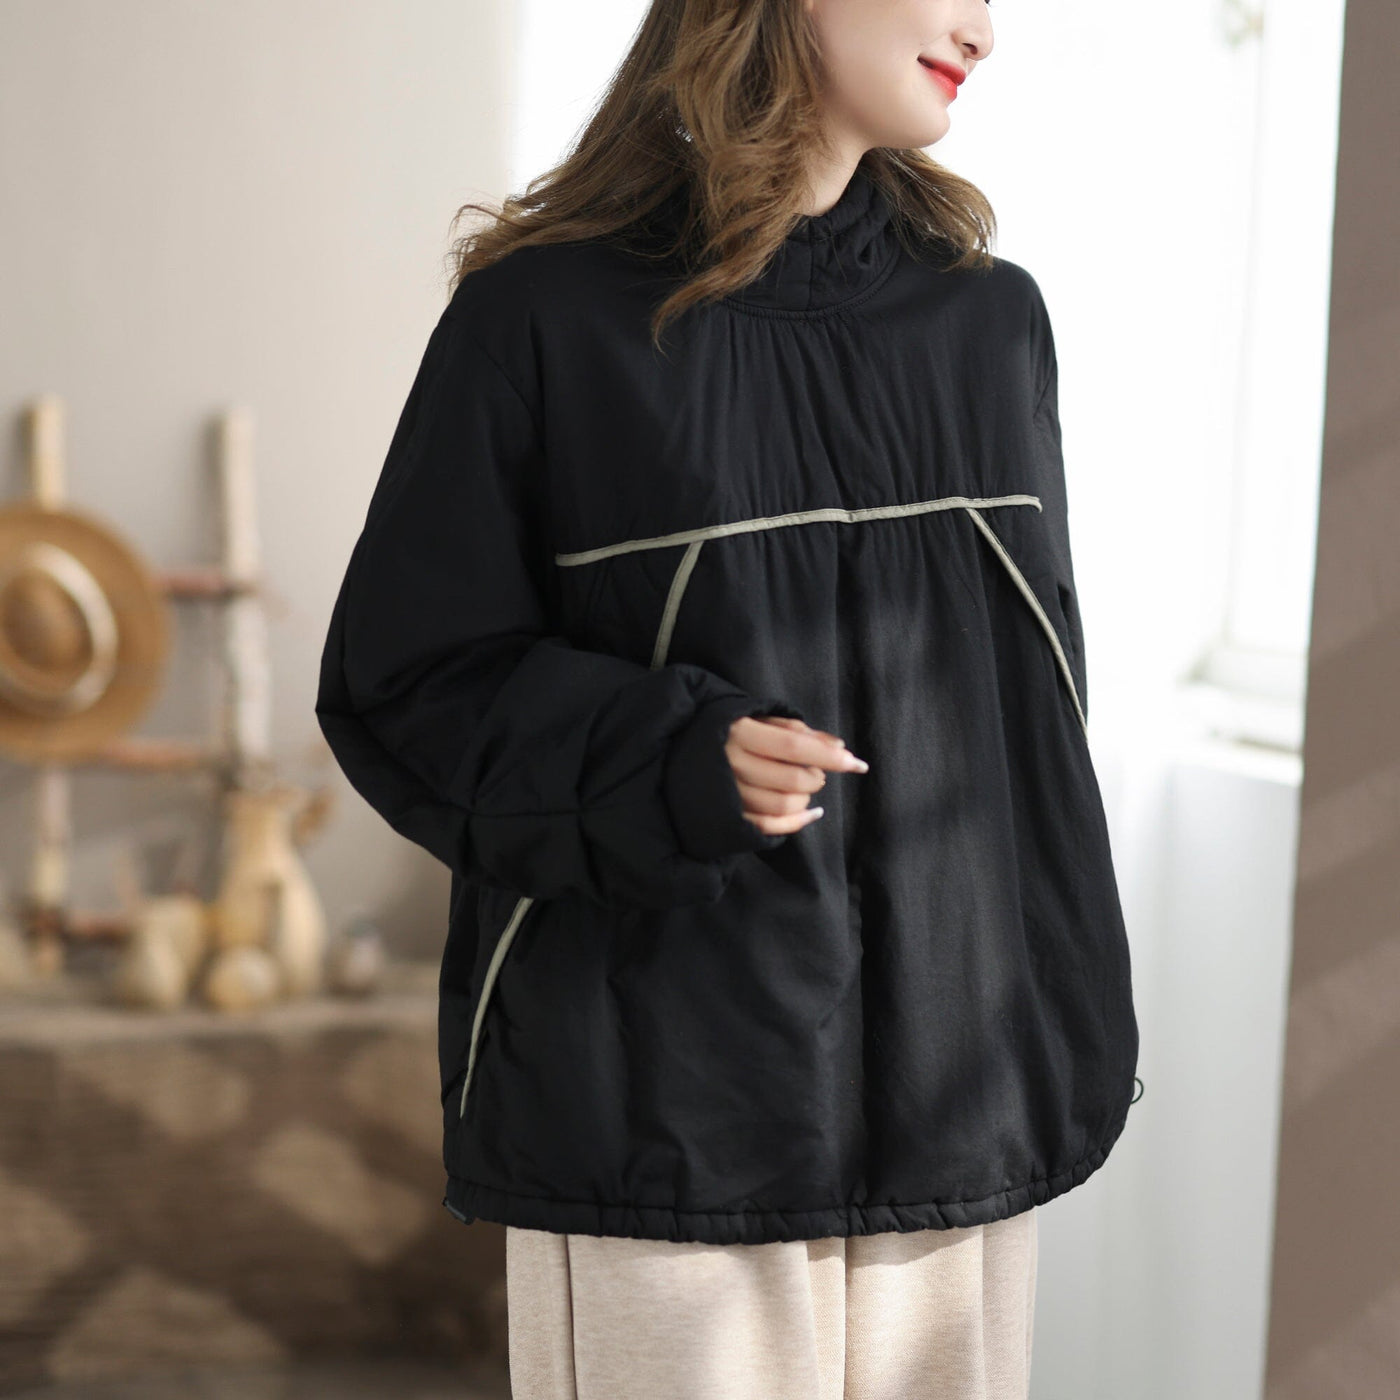 Autumn Winter Minimalist Hooded Pull Over Coat Nov 2023 New Arrival One Size Black 